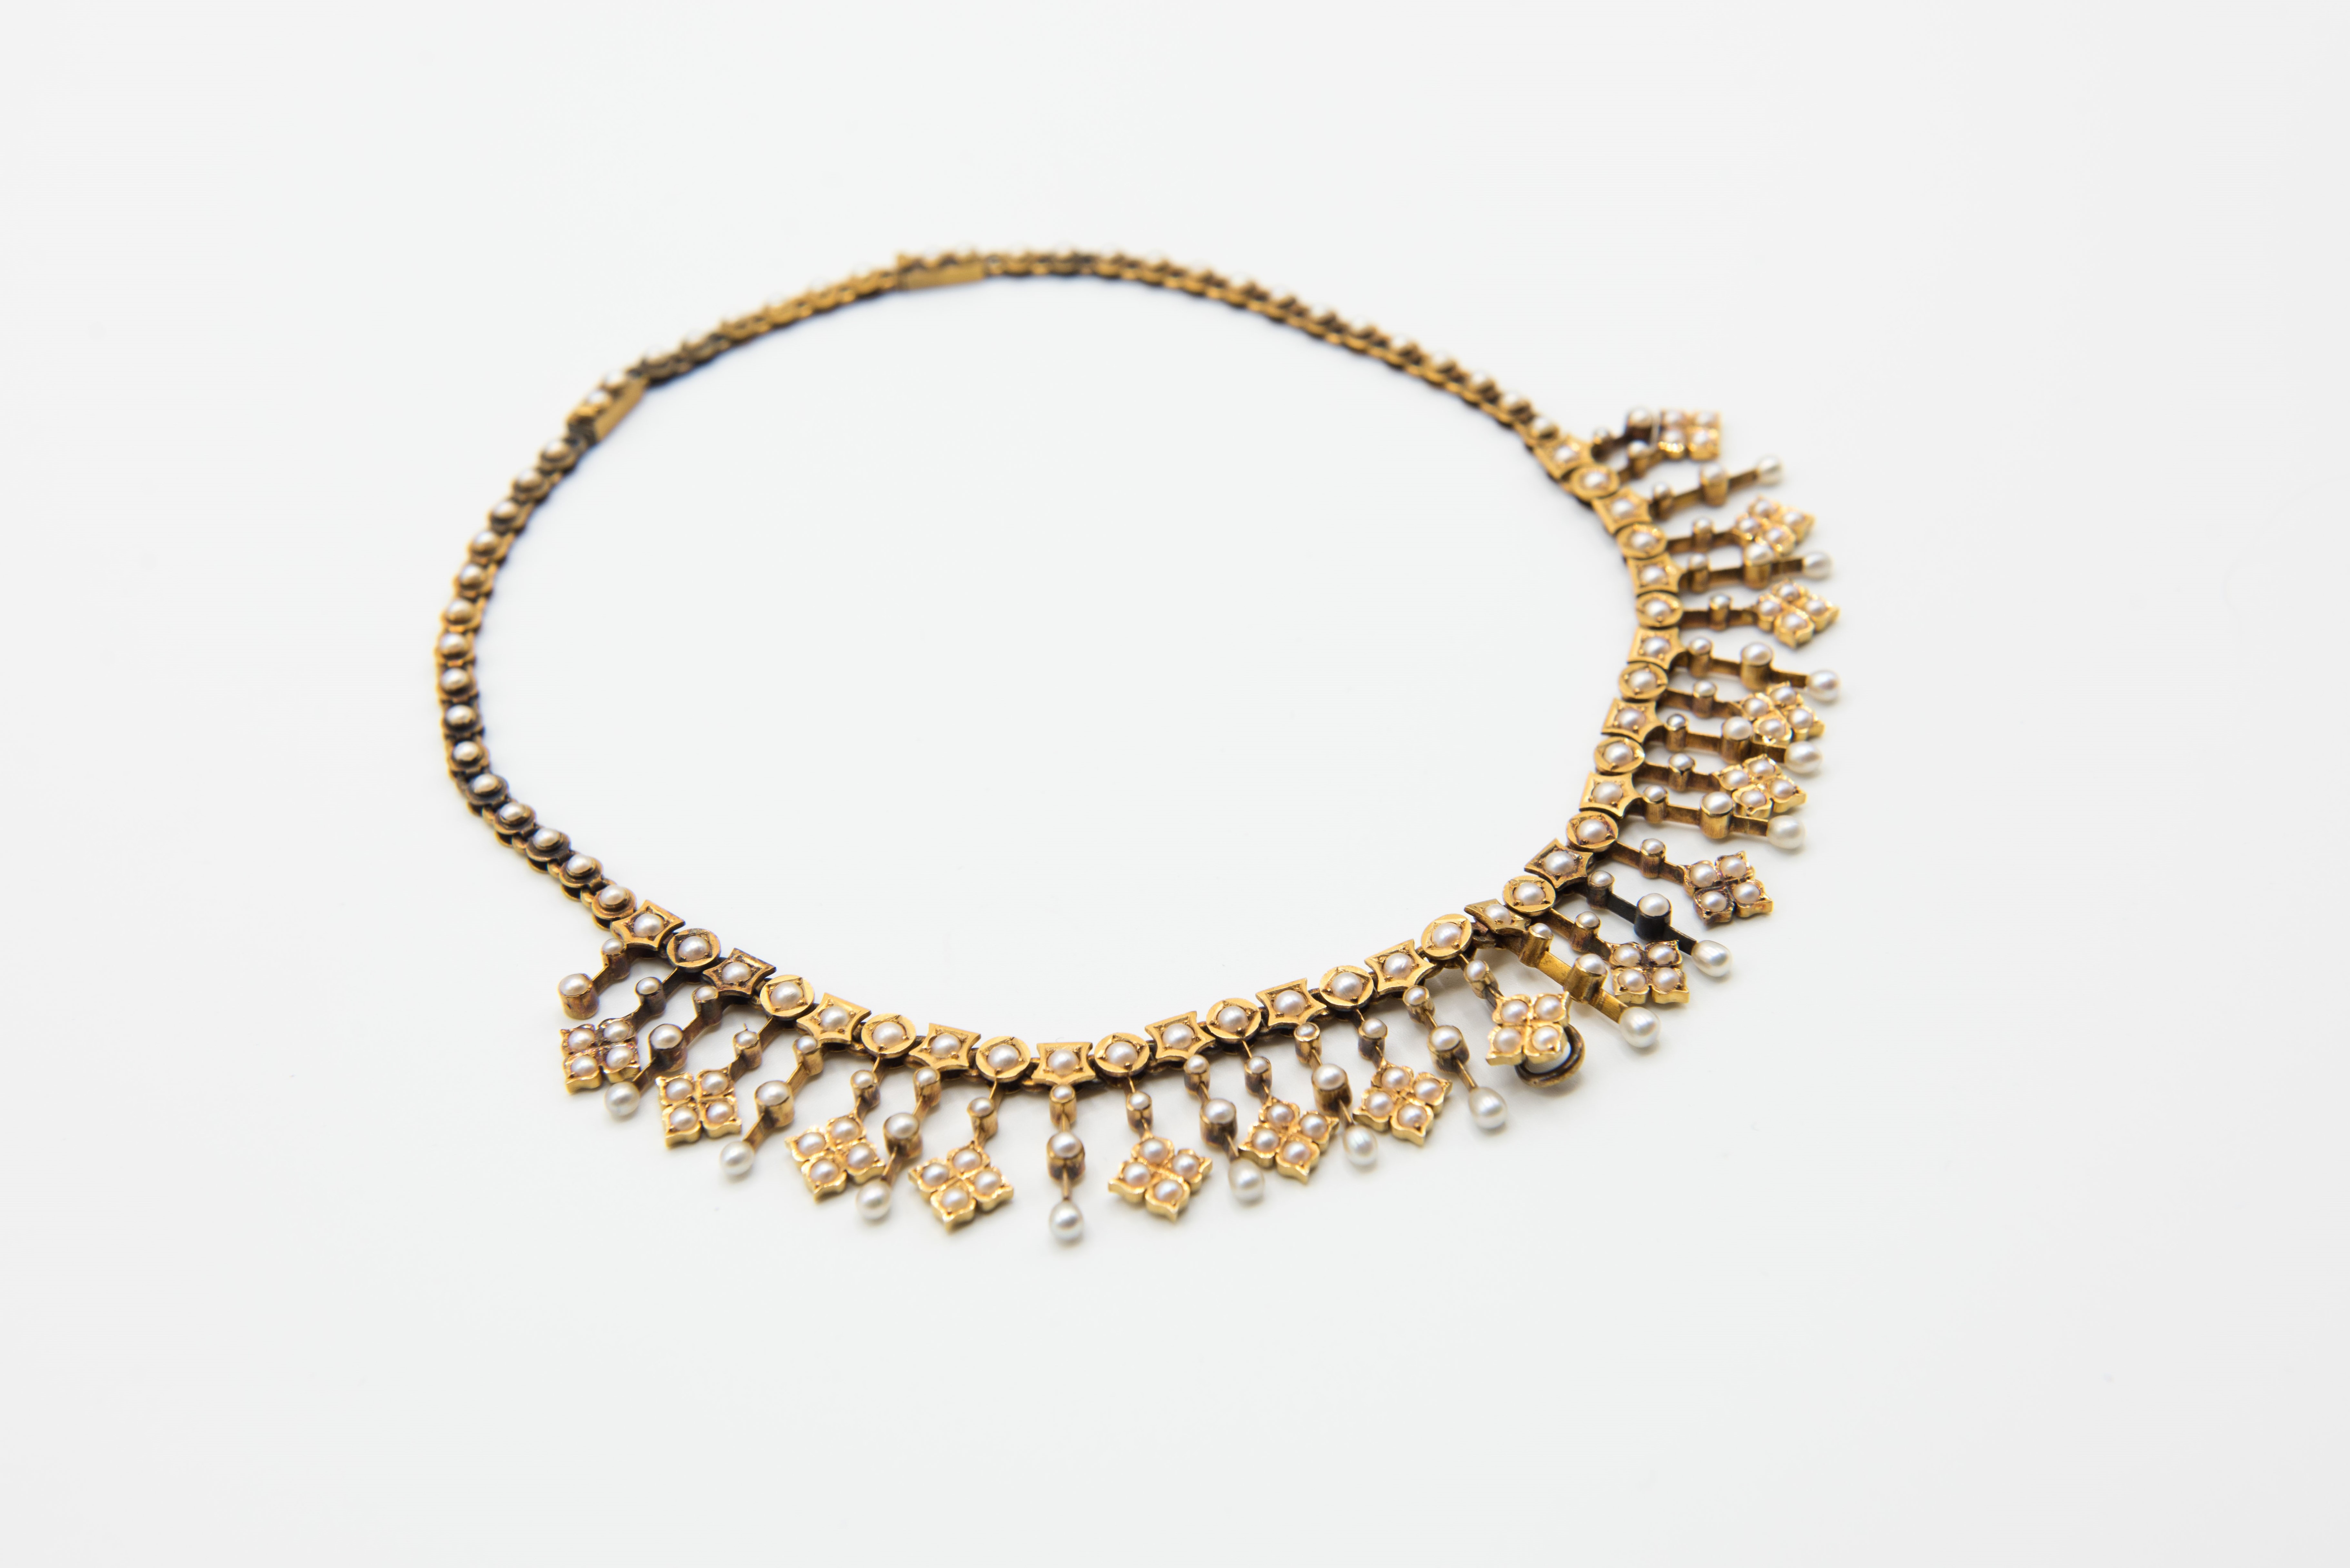 A SEED PEARL FRINGE NECKLACE